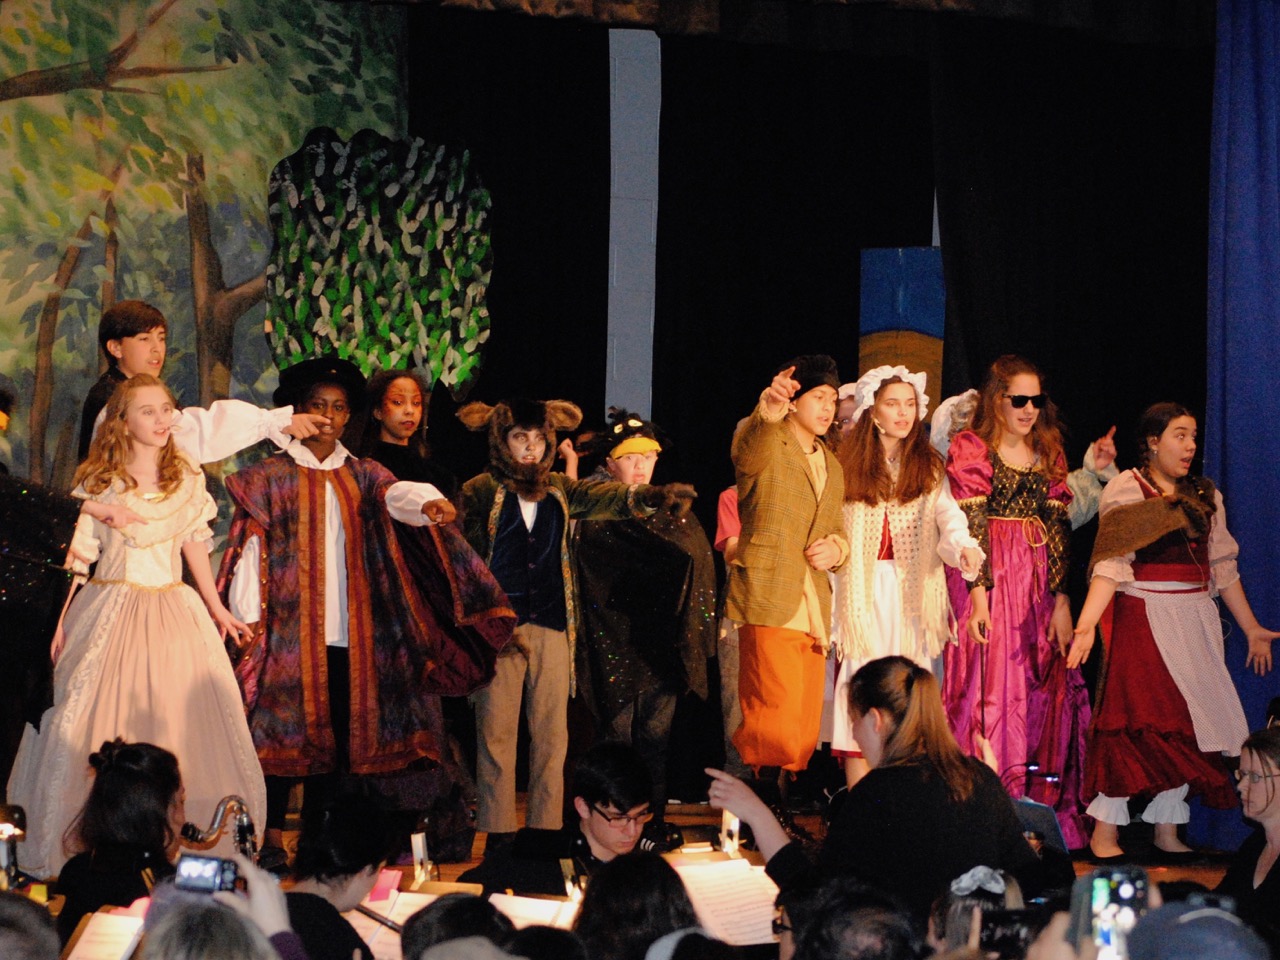 Congratulations to our PVMS Players, Mrs. Craane and Ms. Kraus for two great performances of Into the Woods. Bravo!